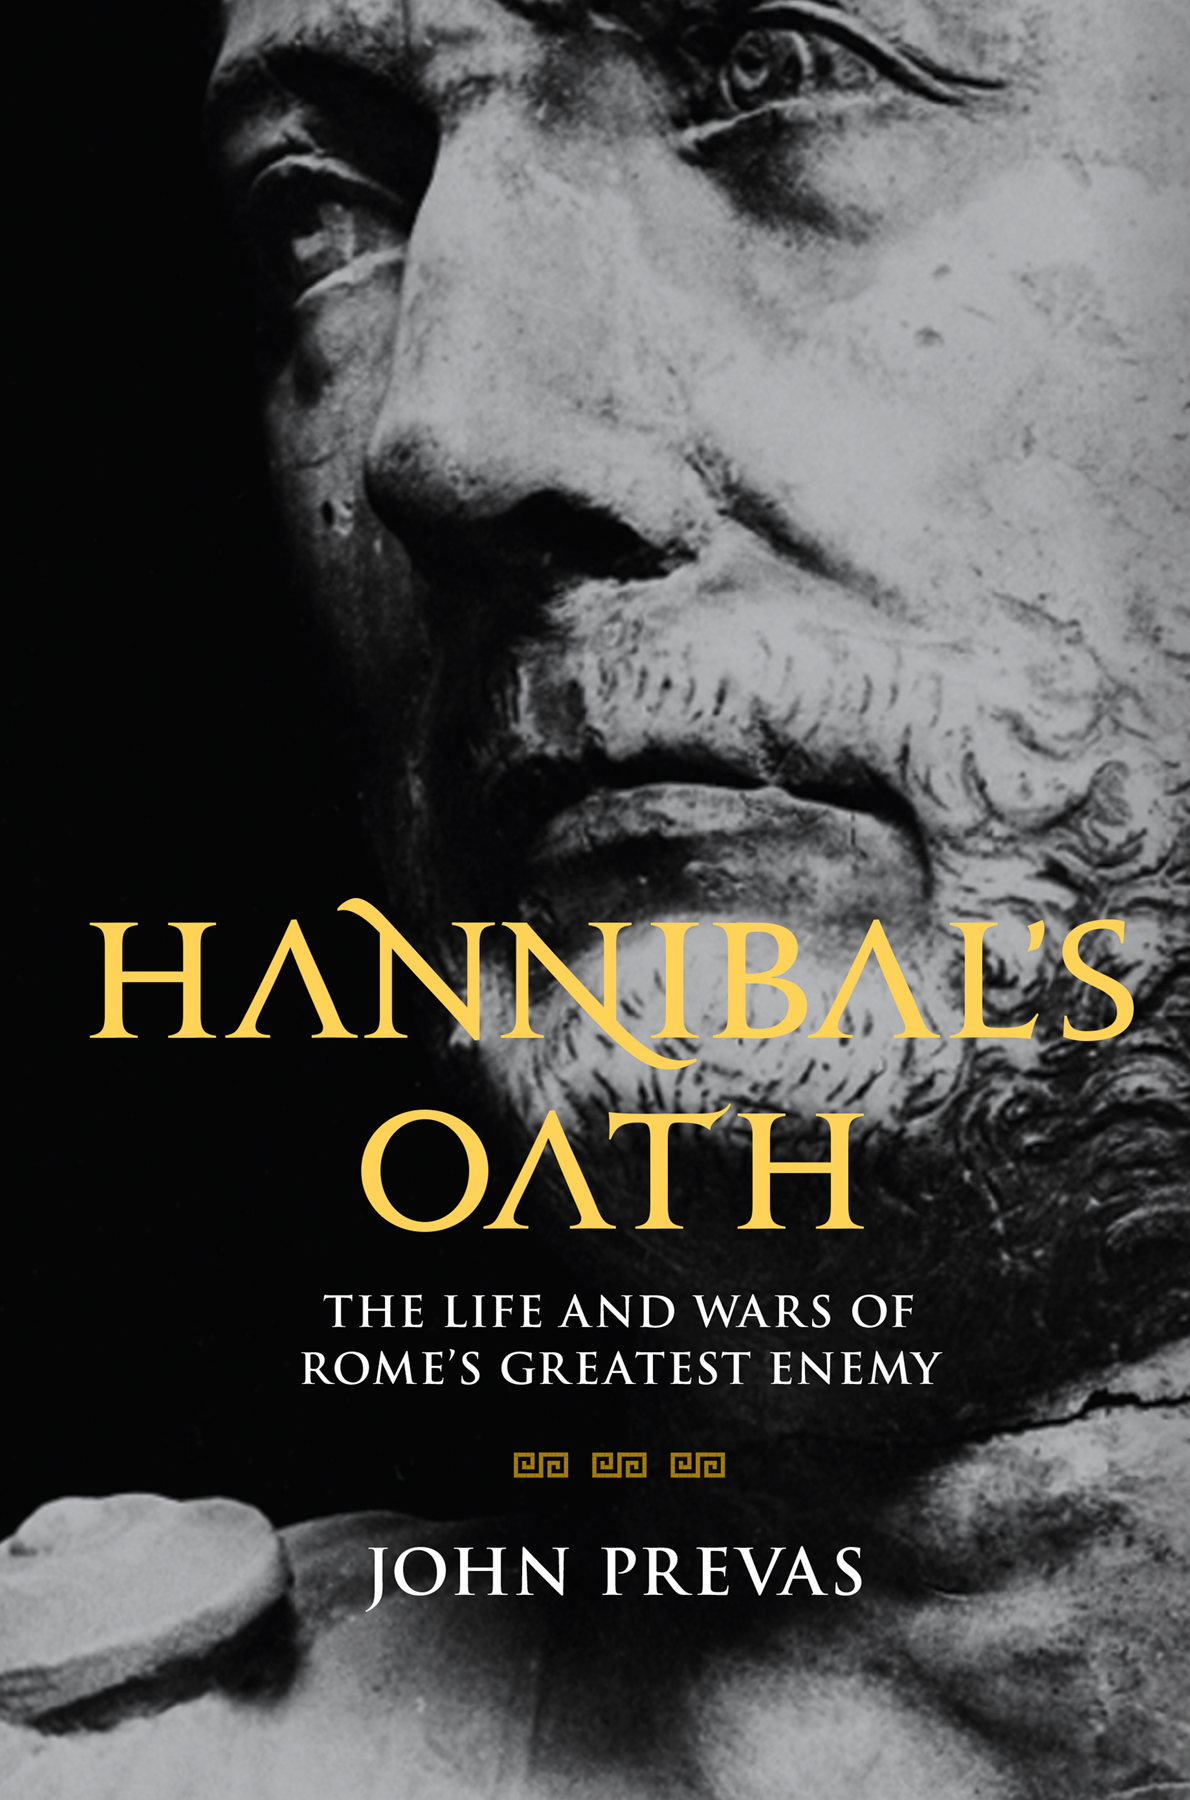 Hannibal's Oath: The Life and Wars of Rome's Greatest Enemy